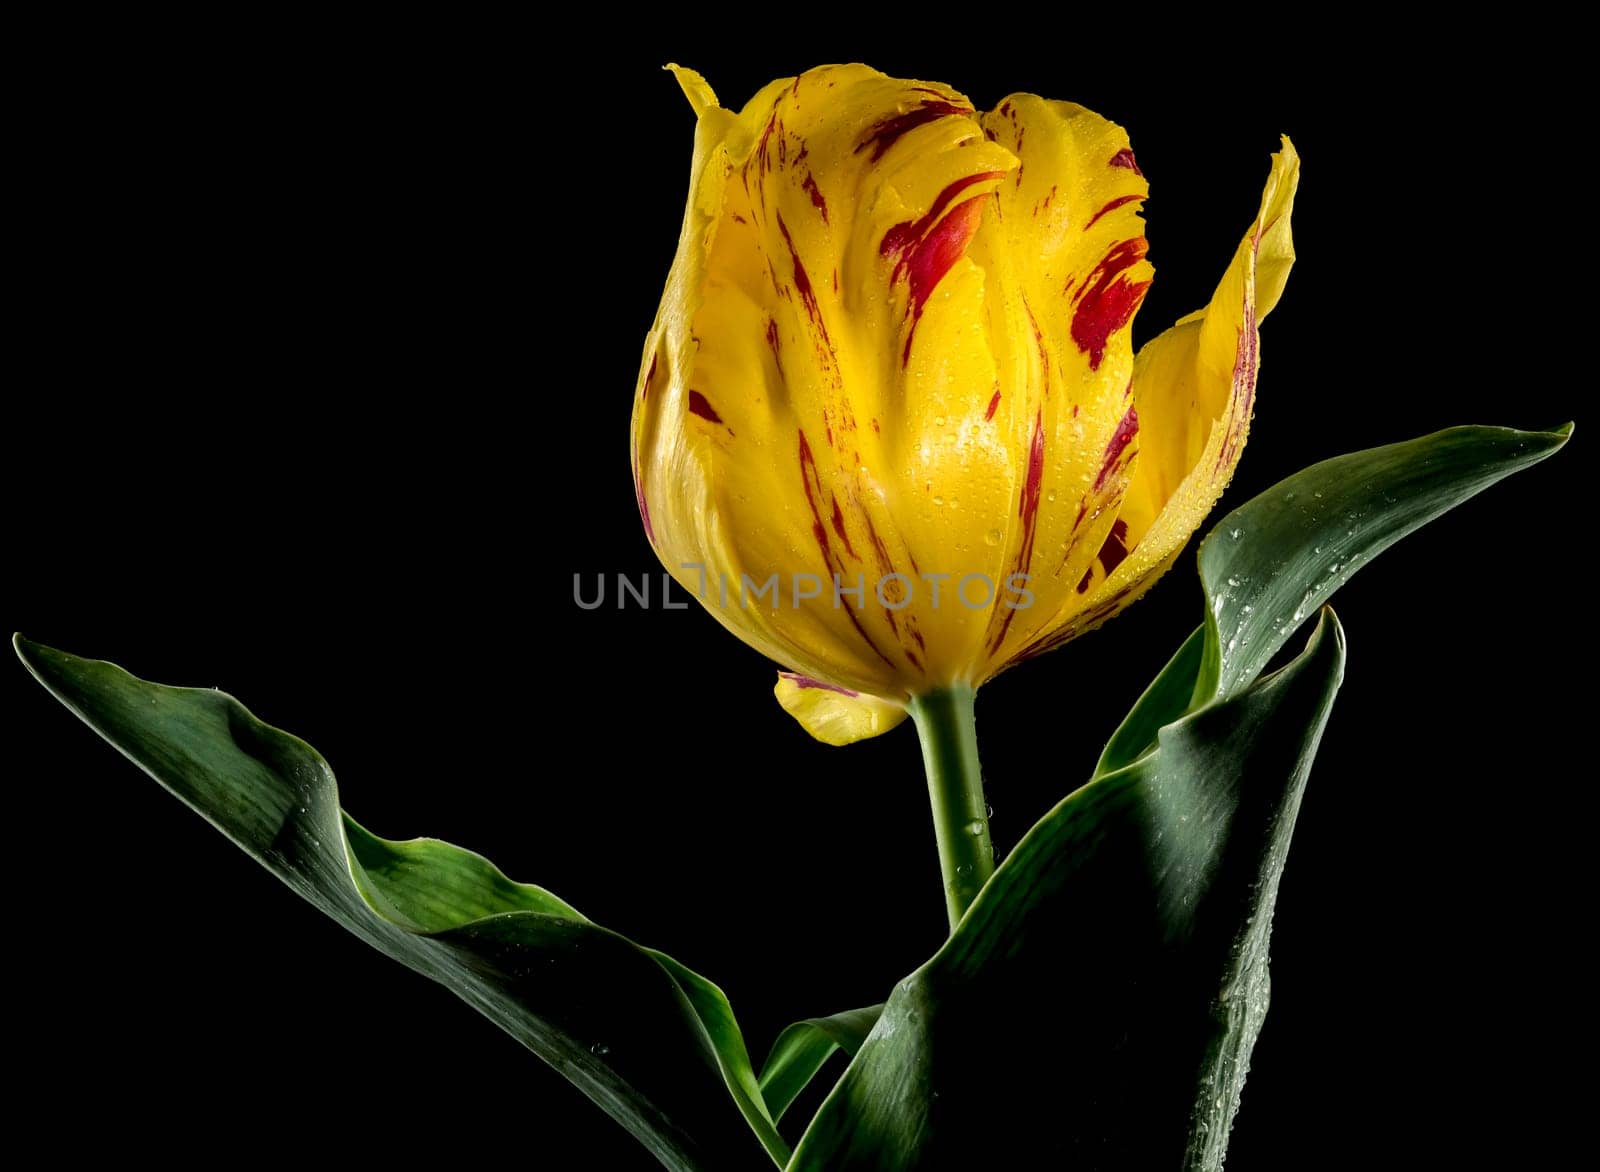 Beautiful yellow Tulip La Courtine Parrot flower isolated on a black background. Flower head close-up.